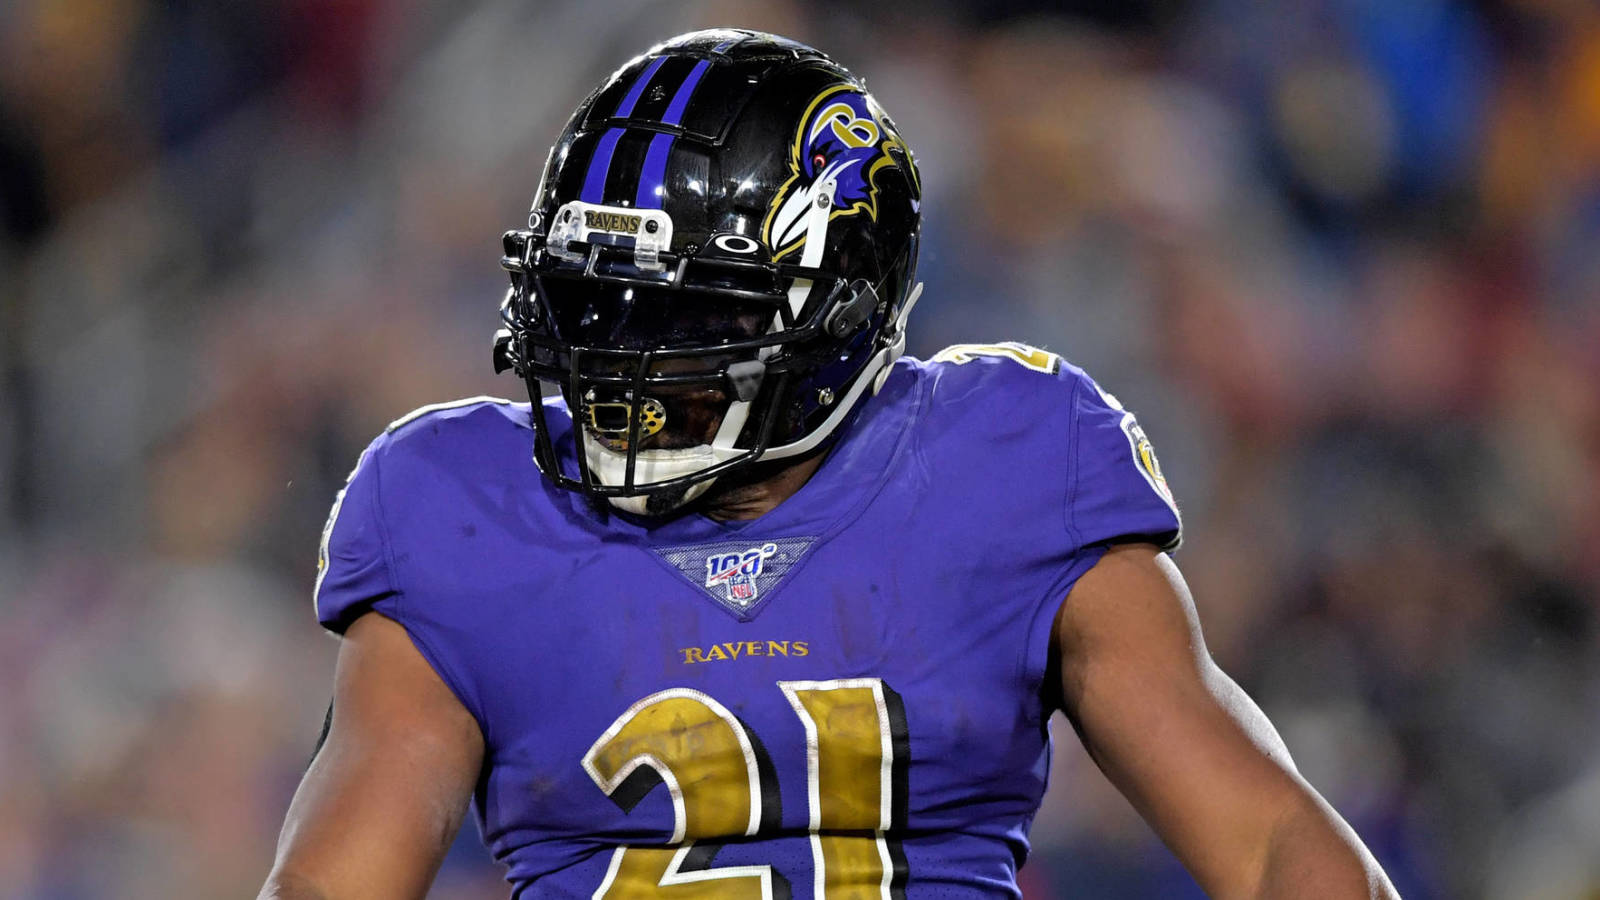 Ravens activate Mark Ingram, Calais Campbell from reserve/COVID list.